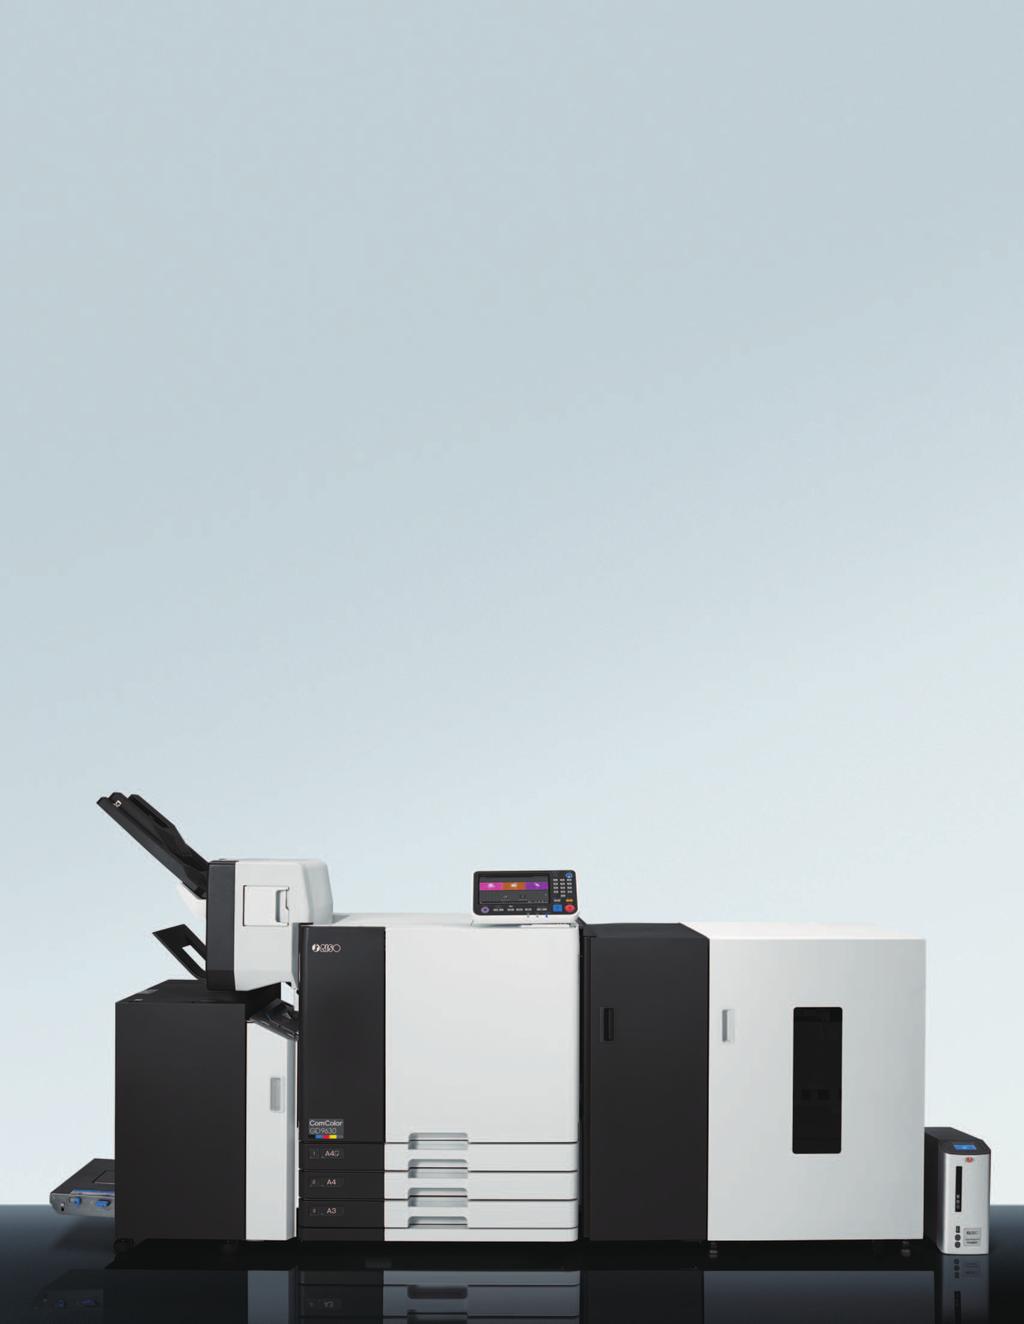 Advanced inkjet technology Heatless imaging The ComColor GD9630 prints reliably using heatless inkjet technology that enables the assembly of outputs without waiting.